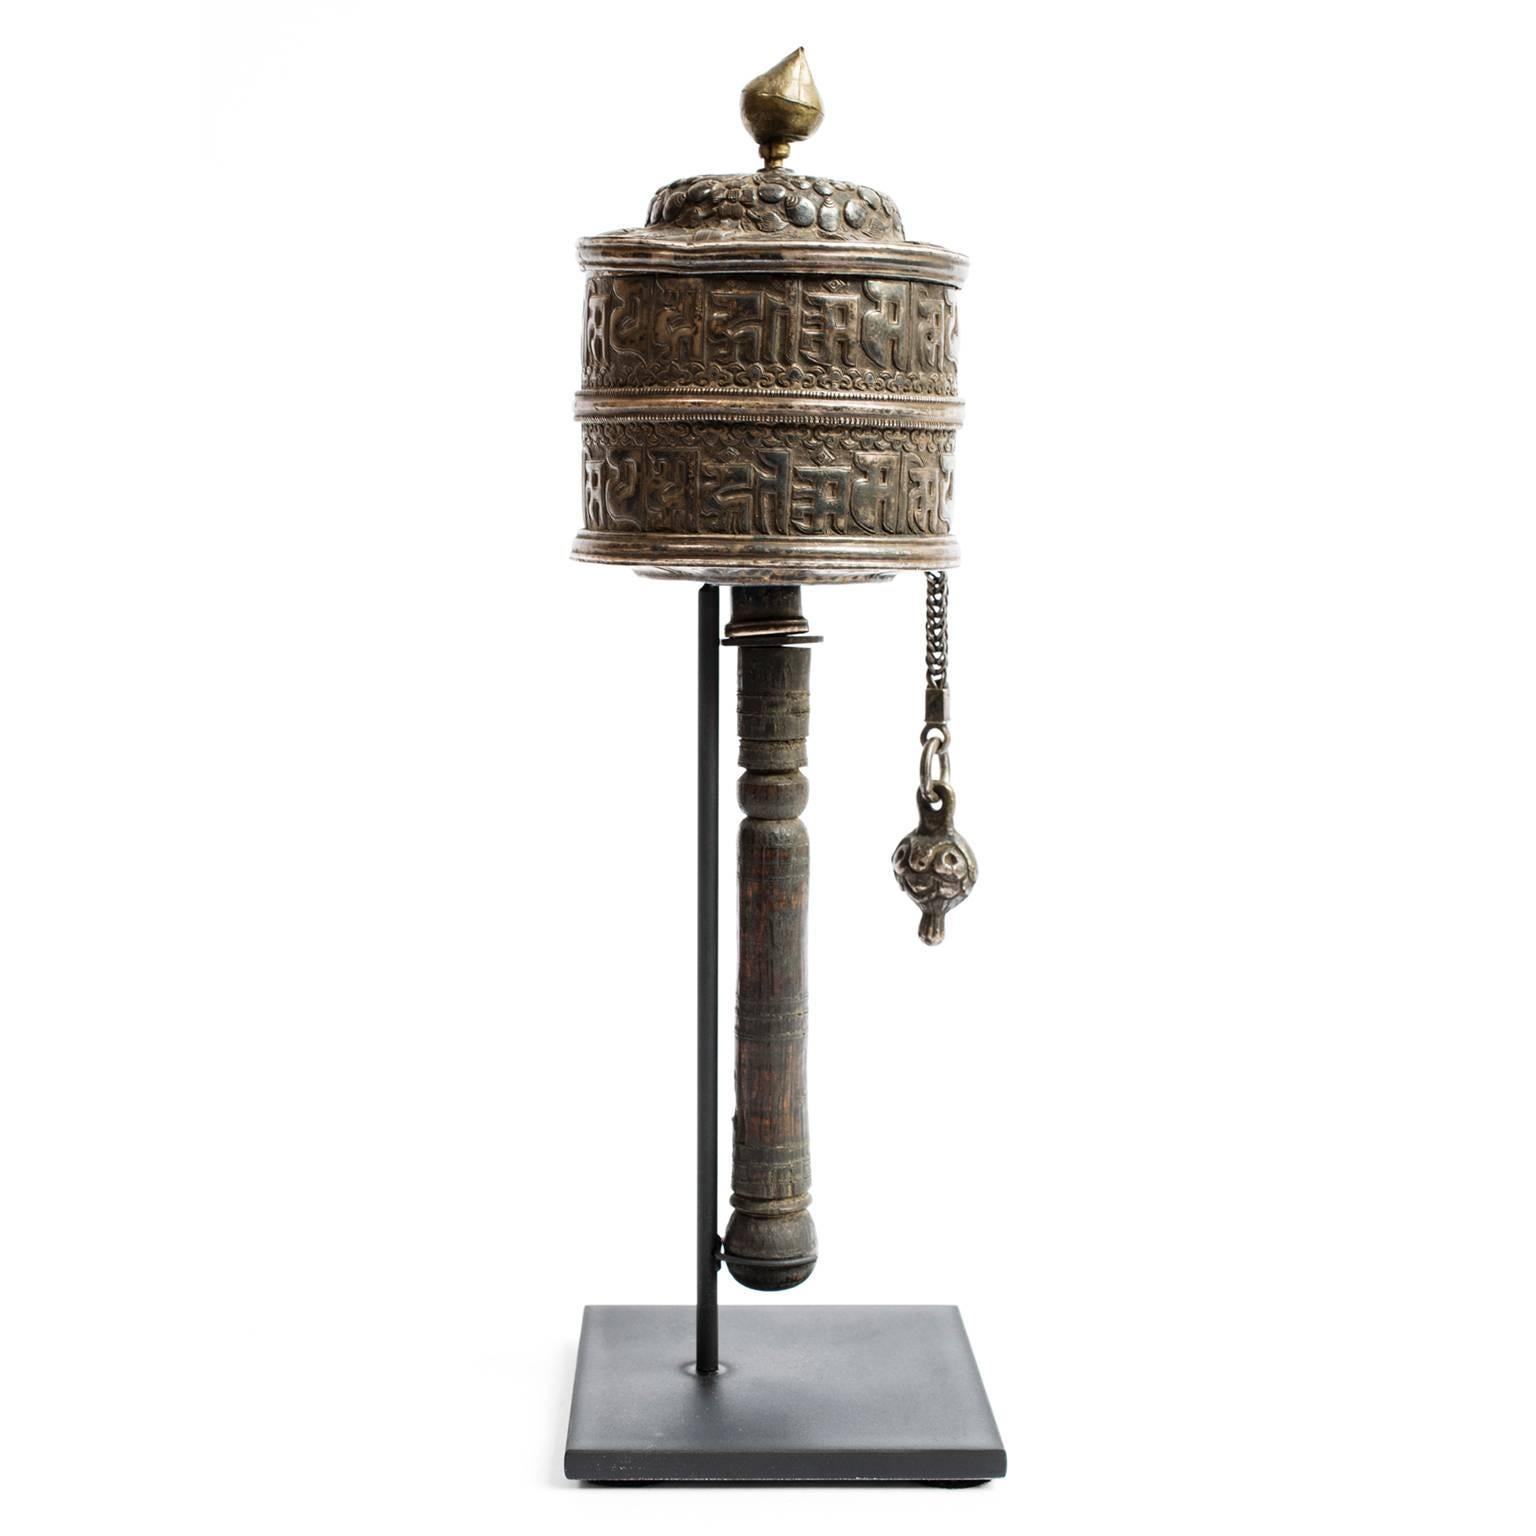 This prayer wheel, made in the early 20th century, is a sacred object to people who practice Tibetan Buddhism. This finely crafted wheel would have been held and spun while chanting a mantra (or prayer). Prayer wheels come in many sizes. Some are